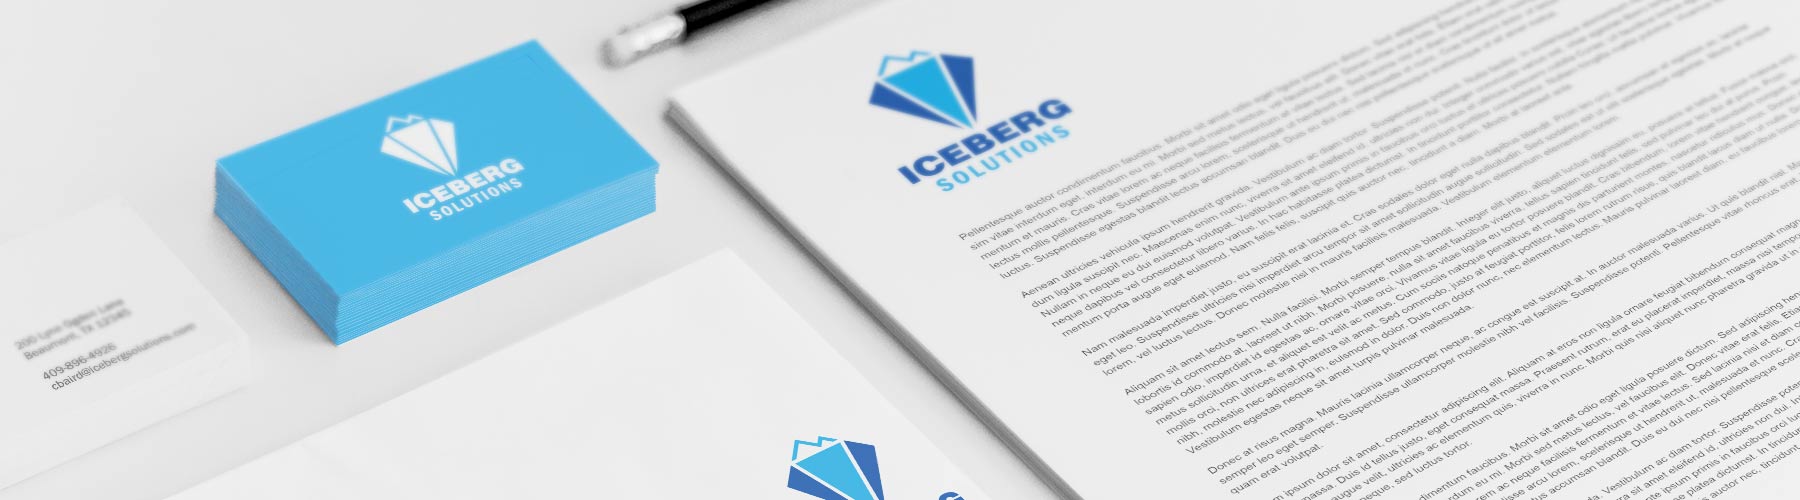 Branding example with business cards and letterhead